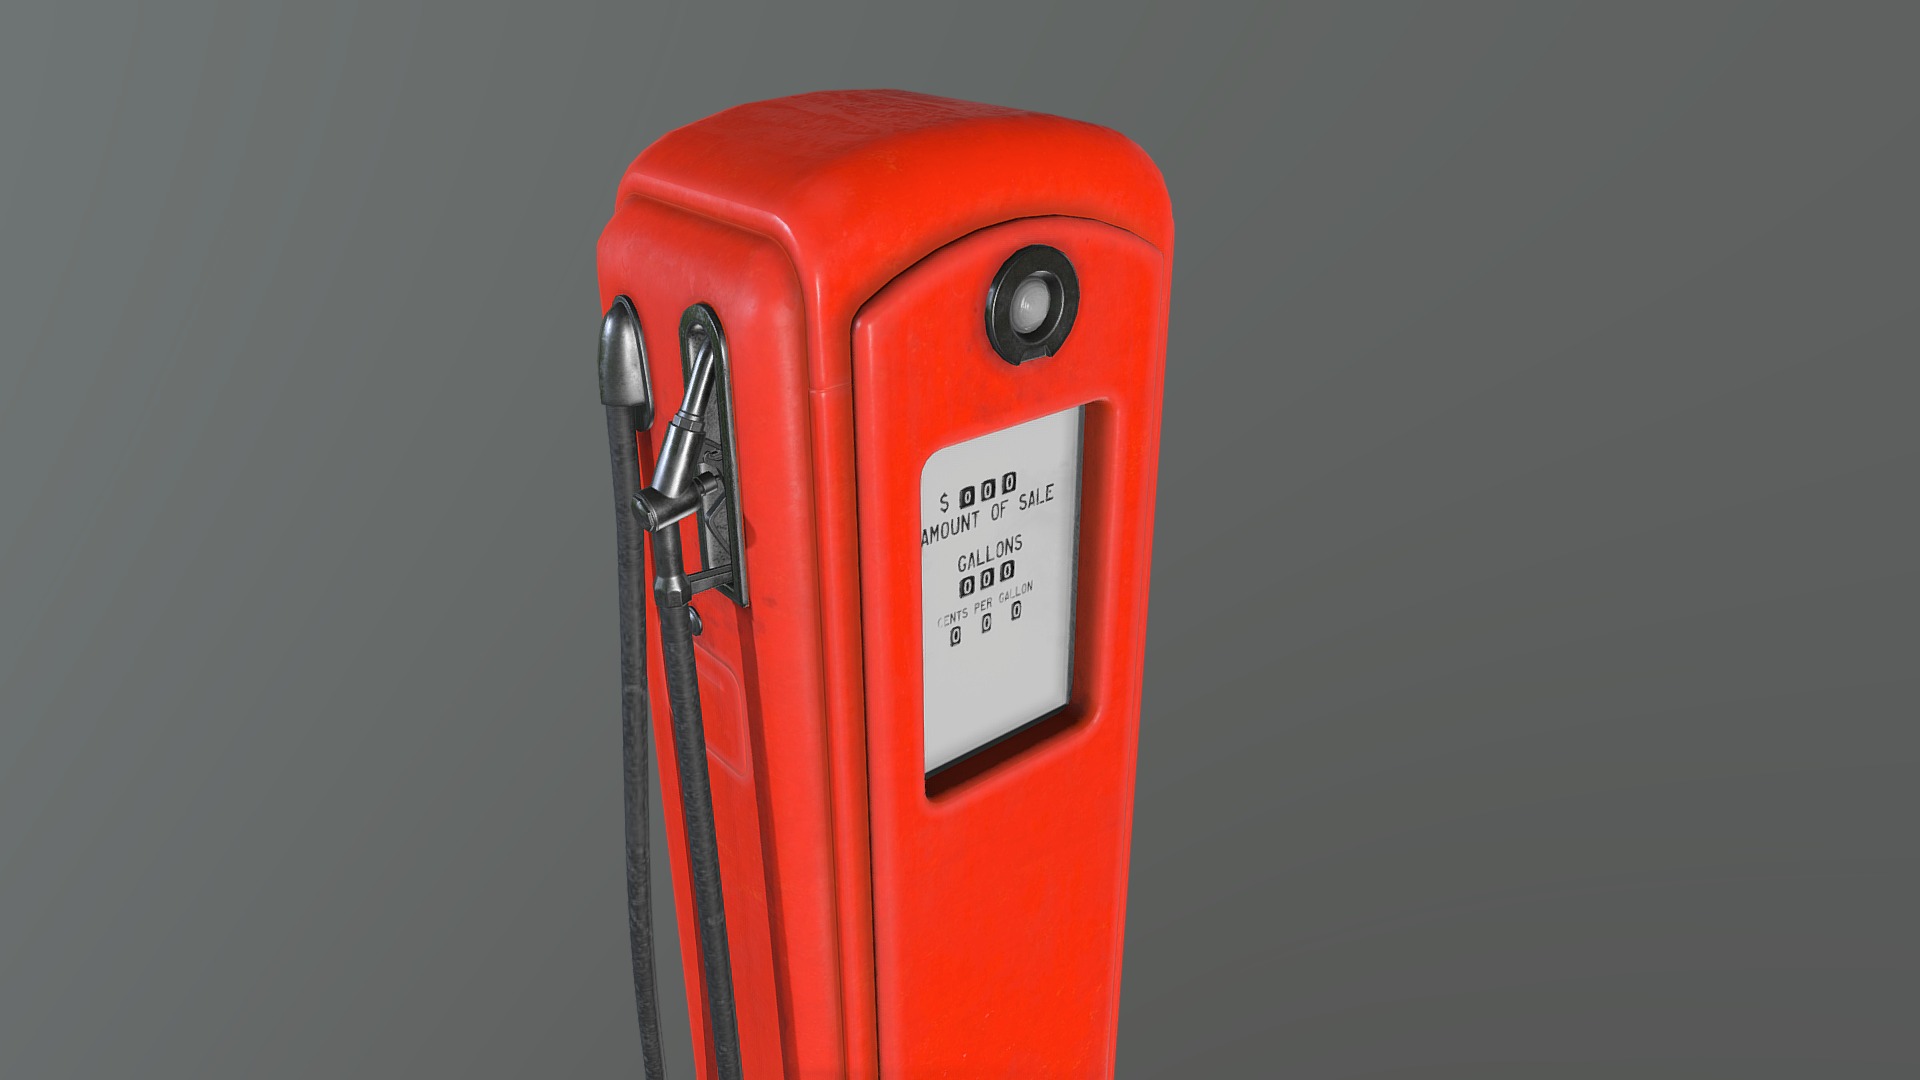 3D model Old Gas Pump - This is a 3D model of the Old Gas Pump. The 3D model is about a red and silver stapler.